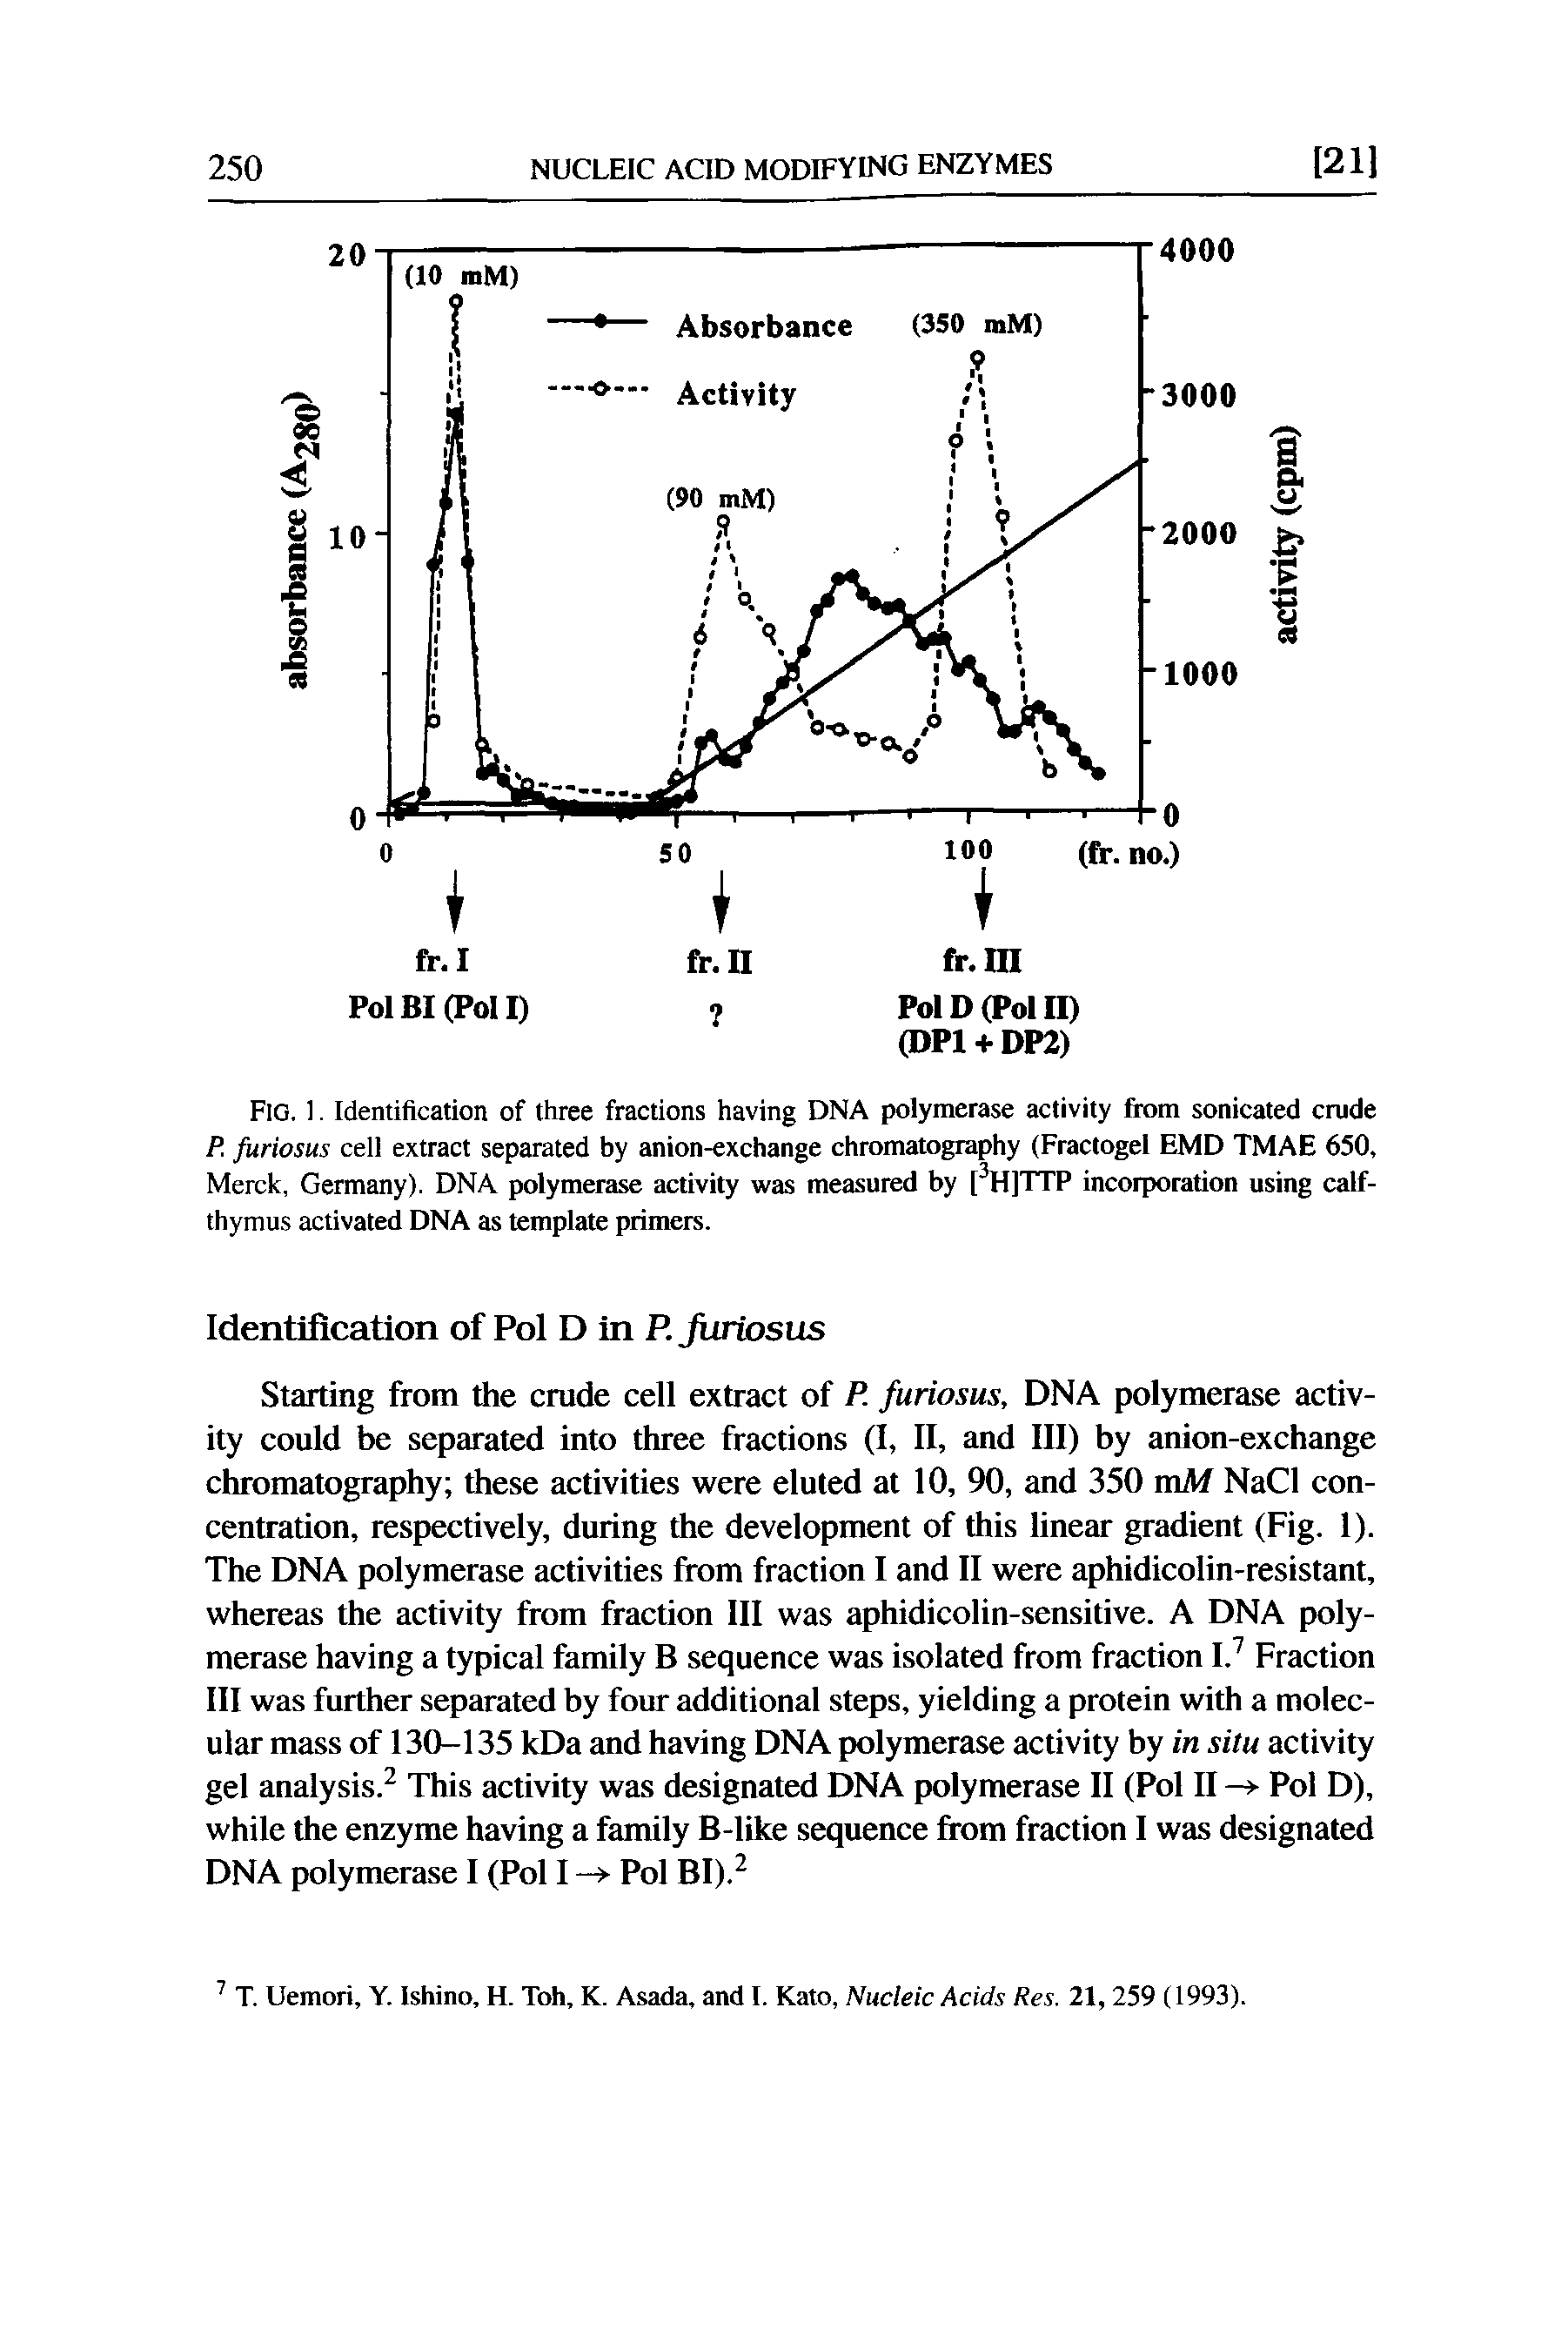 Fig. 1. Identification of three fractions having DNA polymerase activity fipom sonicated crude P. furiosus cell extract separated by anion-exchange chromatography (Fiactogel EMD TMAE 650, Merck, Germany). DNA polymerase activity was measured by [ ]TTP incorporation using calf-thymus activated DNA as template primers.